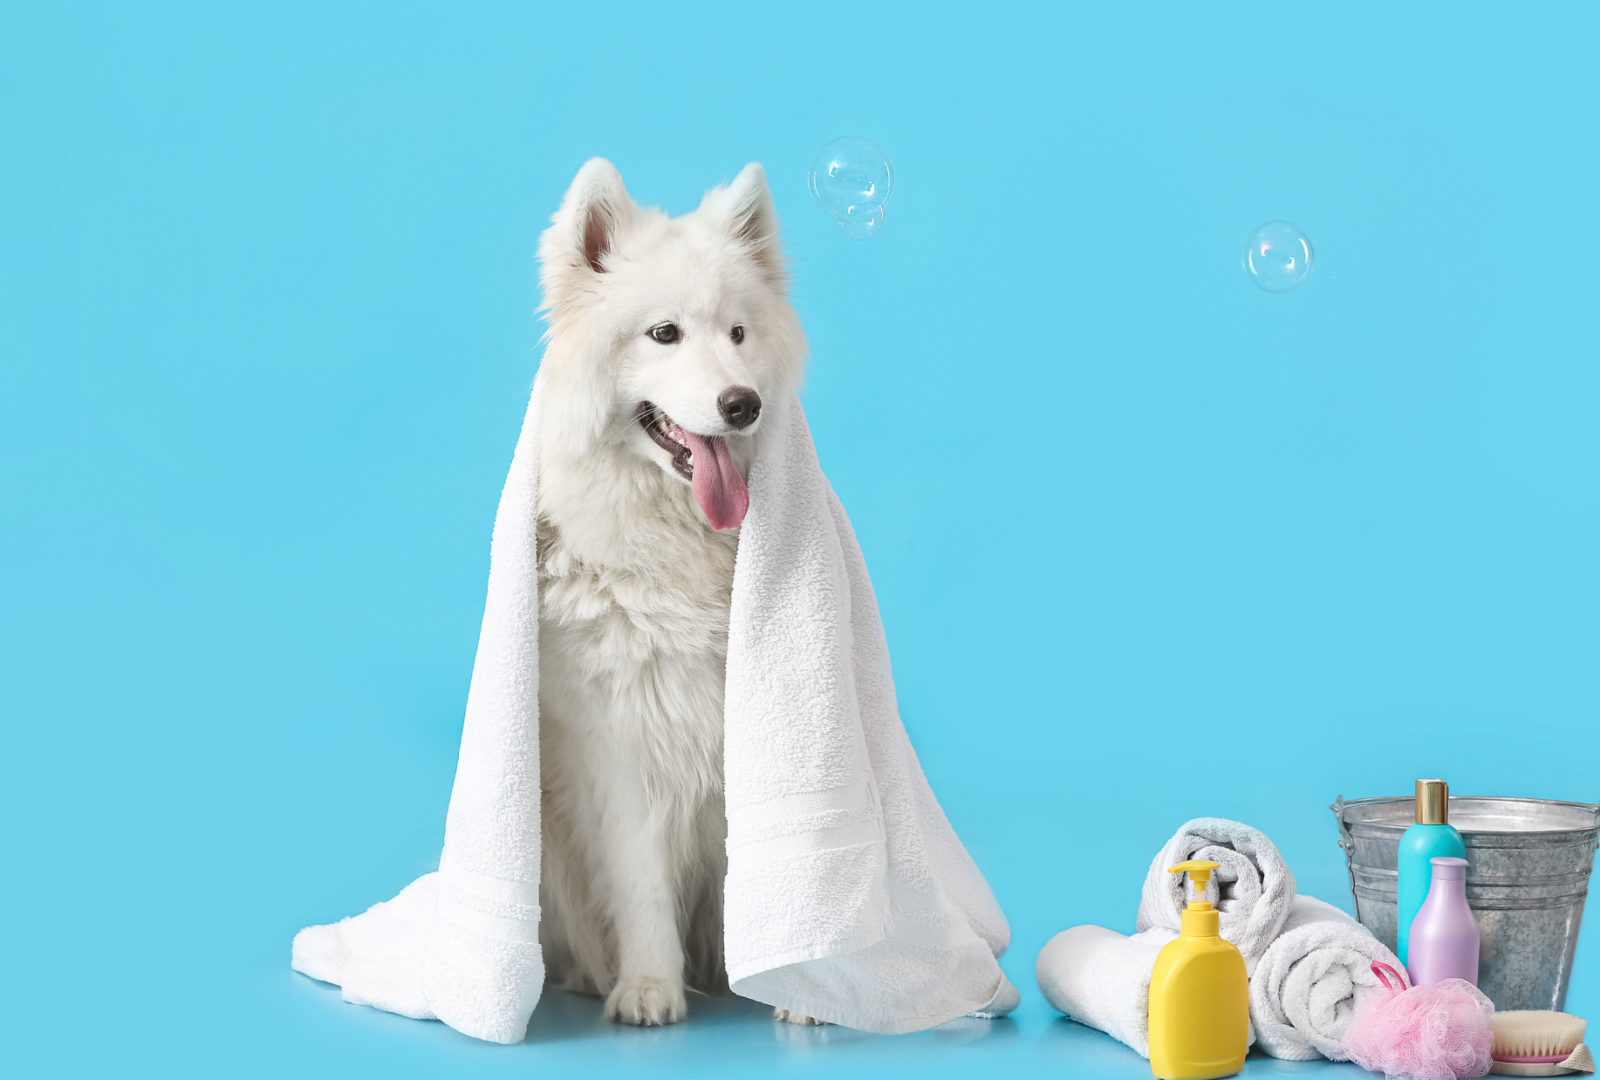 photo of a dog with towel and bathing gear